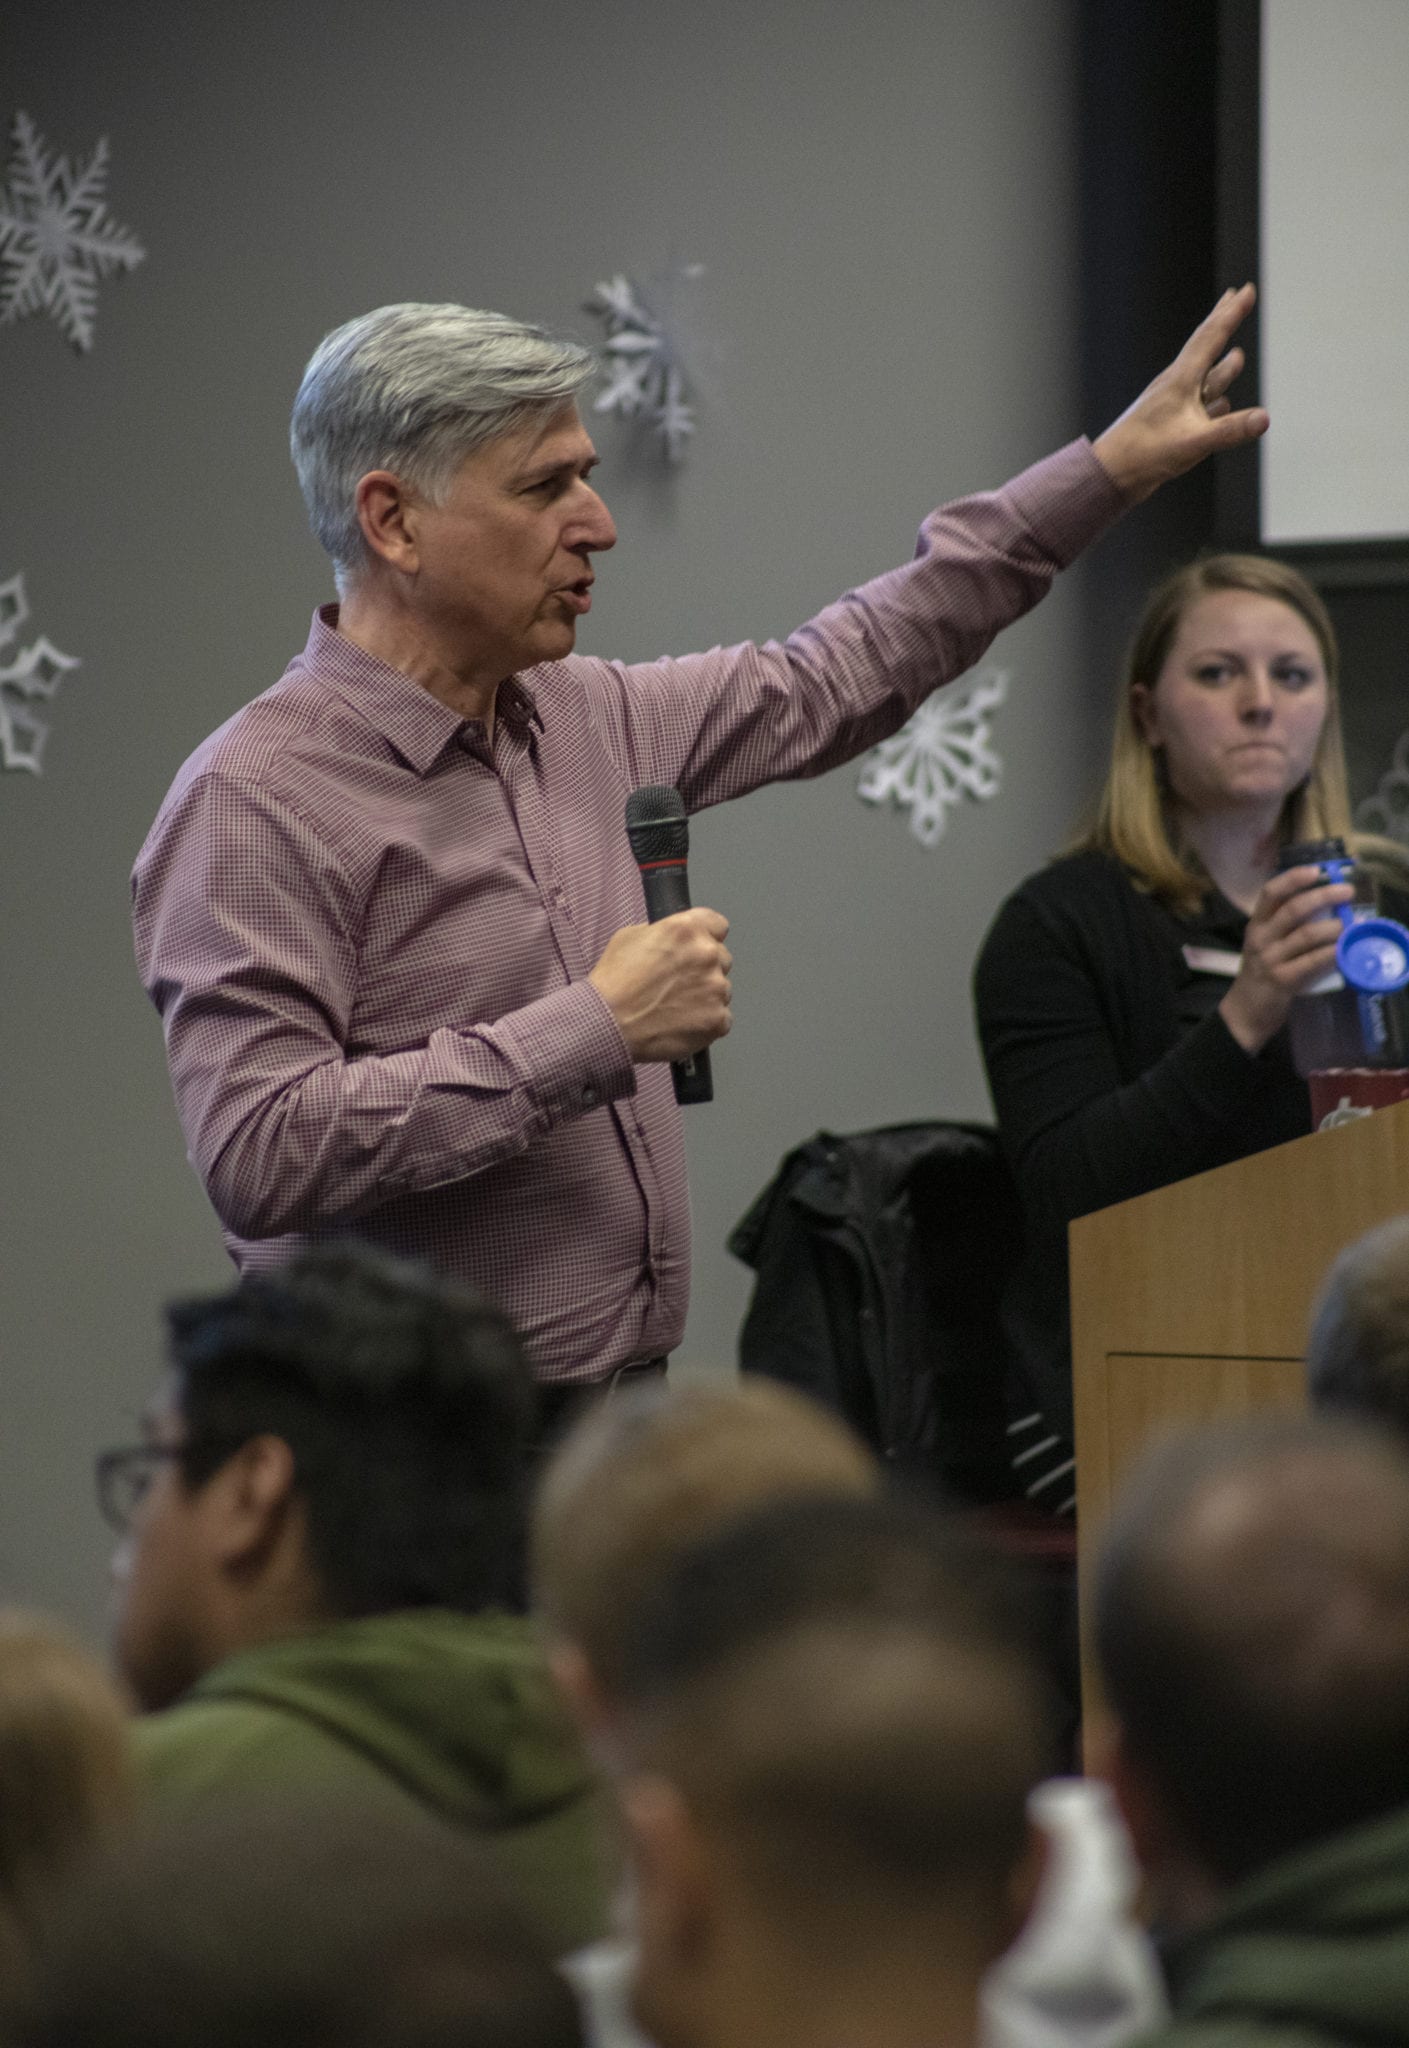 WSUV Chancellor, Mel Netzhammer, delivers opening statements at the spring 2019 ROAR orientation. Photo by Jacob Granneman